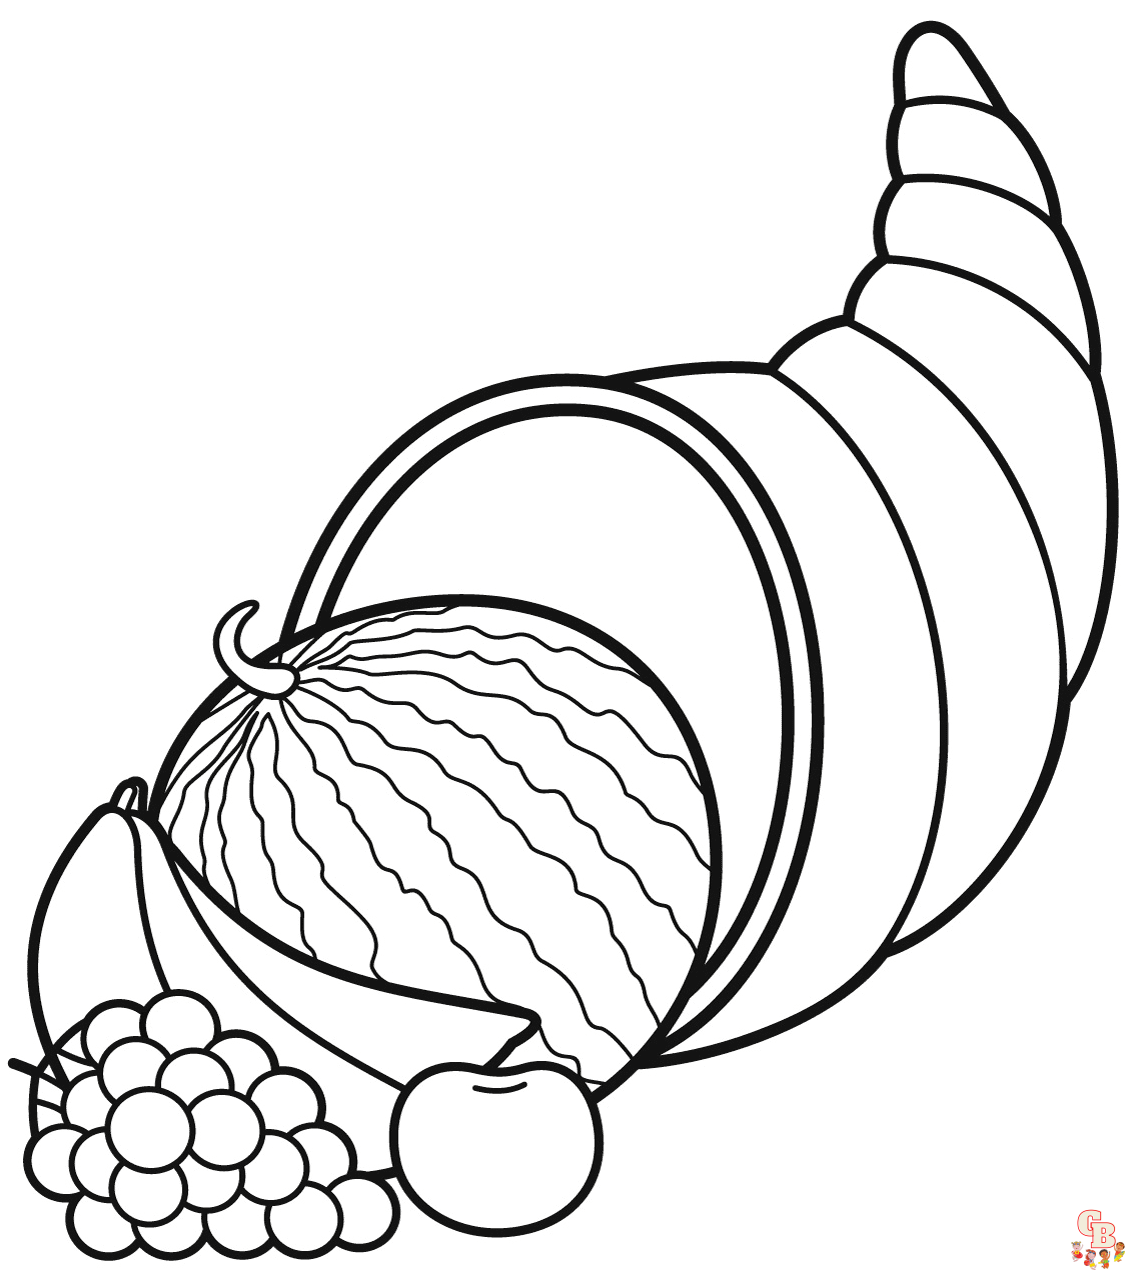 Printable cornucopia coloring pages free for kids and adults